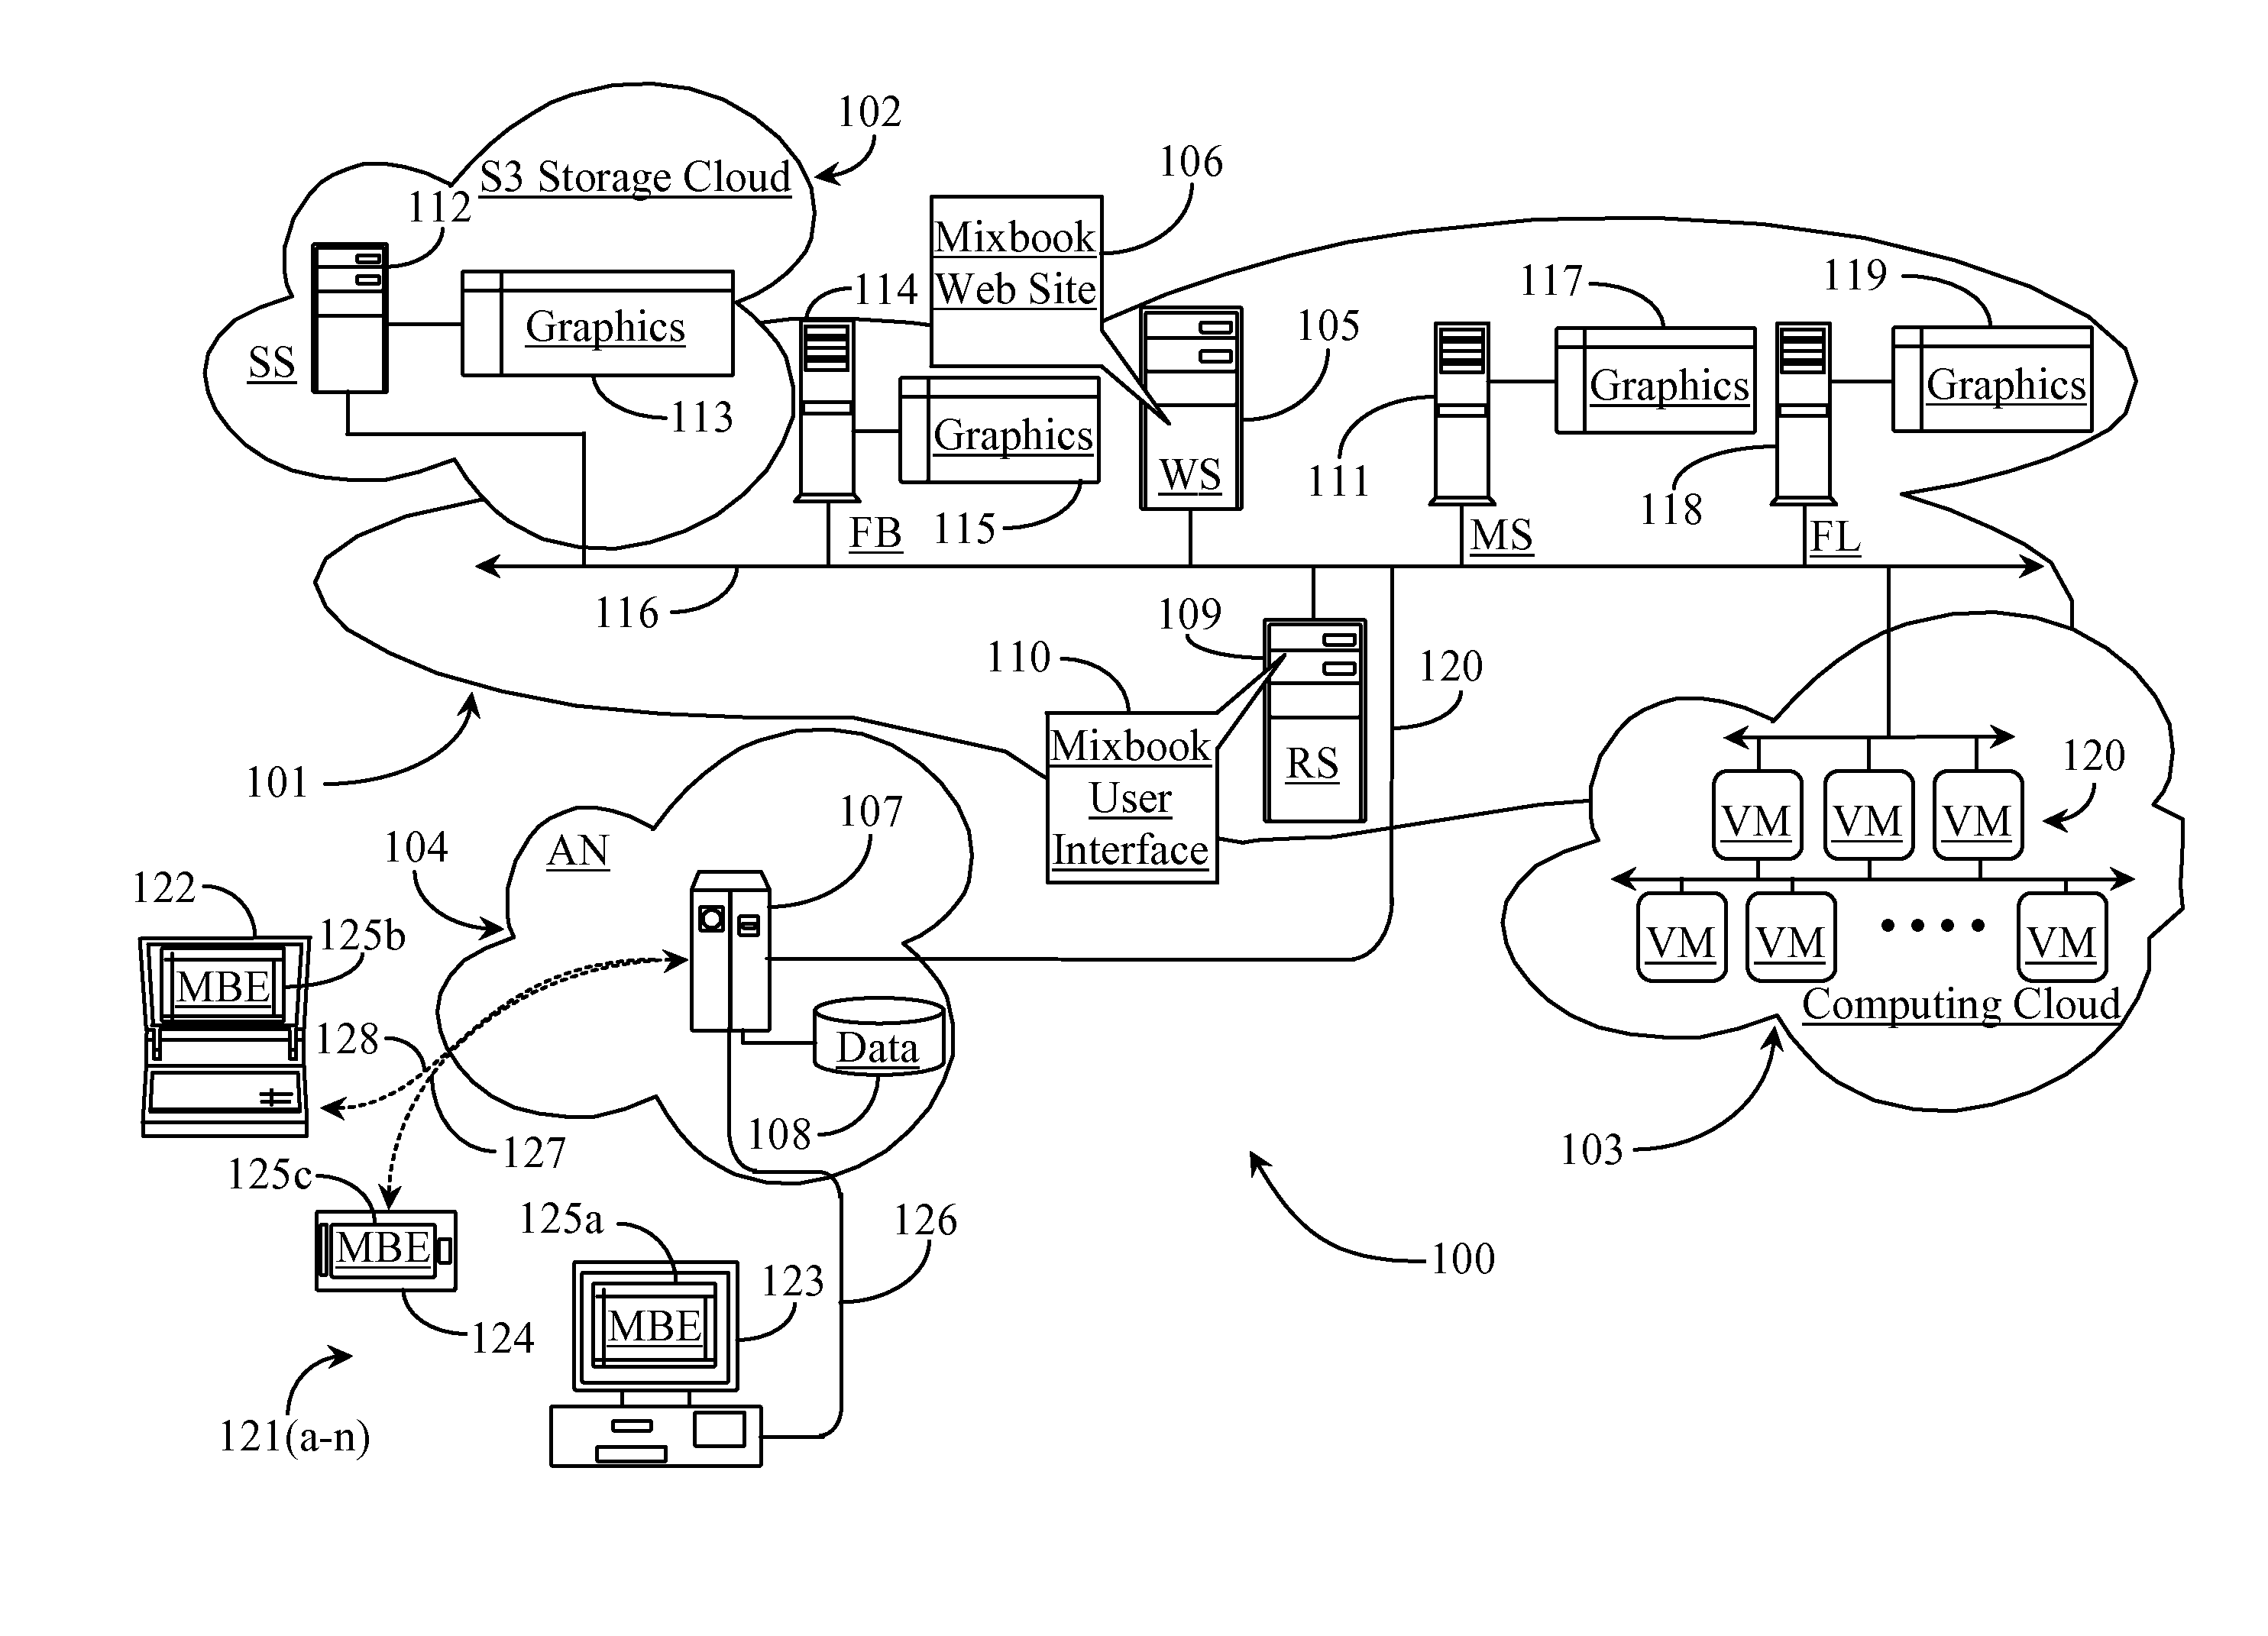 System and Methods for Creating and Editing Photo-Based Projects on a Digital Network